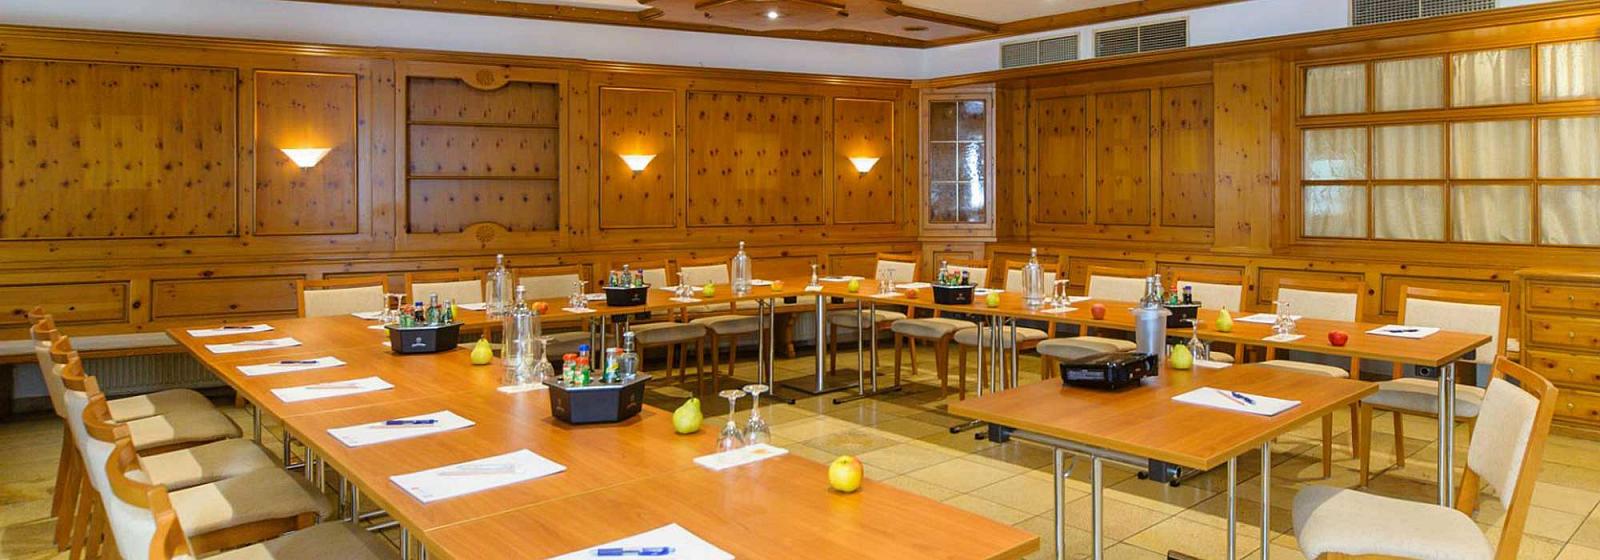 Akzent-Hotel Goldner Stern: Gallery: Conference rooms at Hotel Sternla